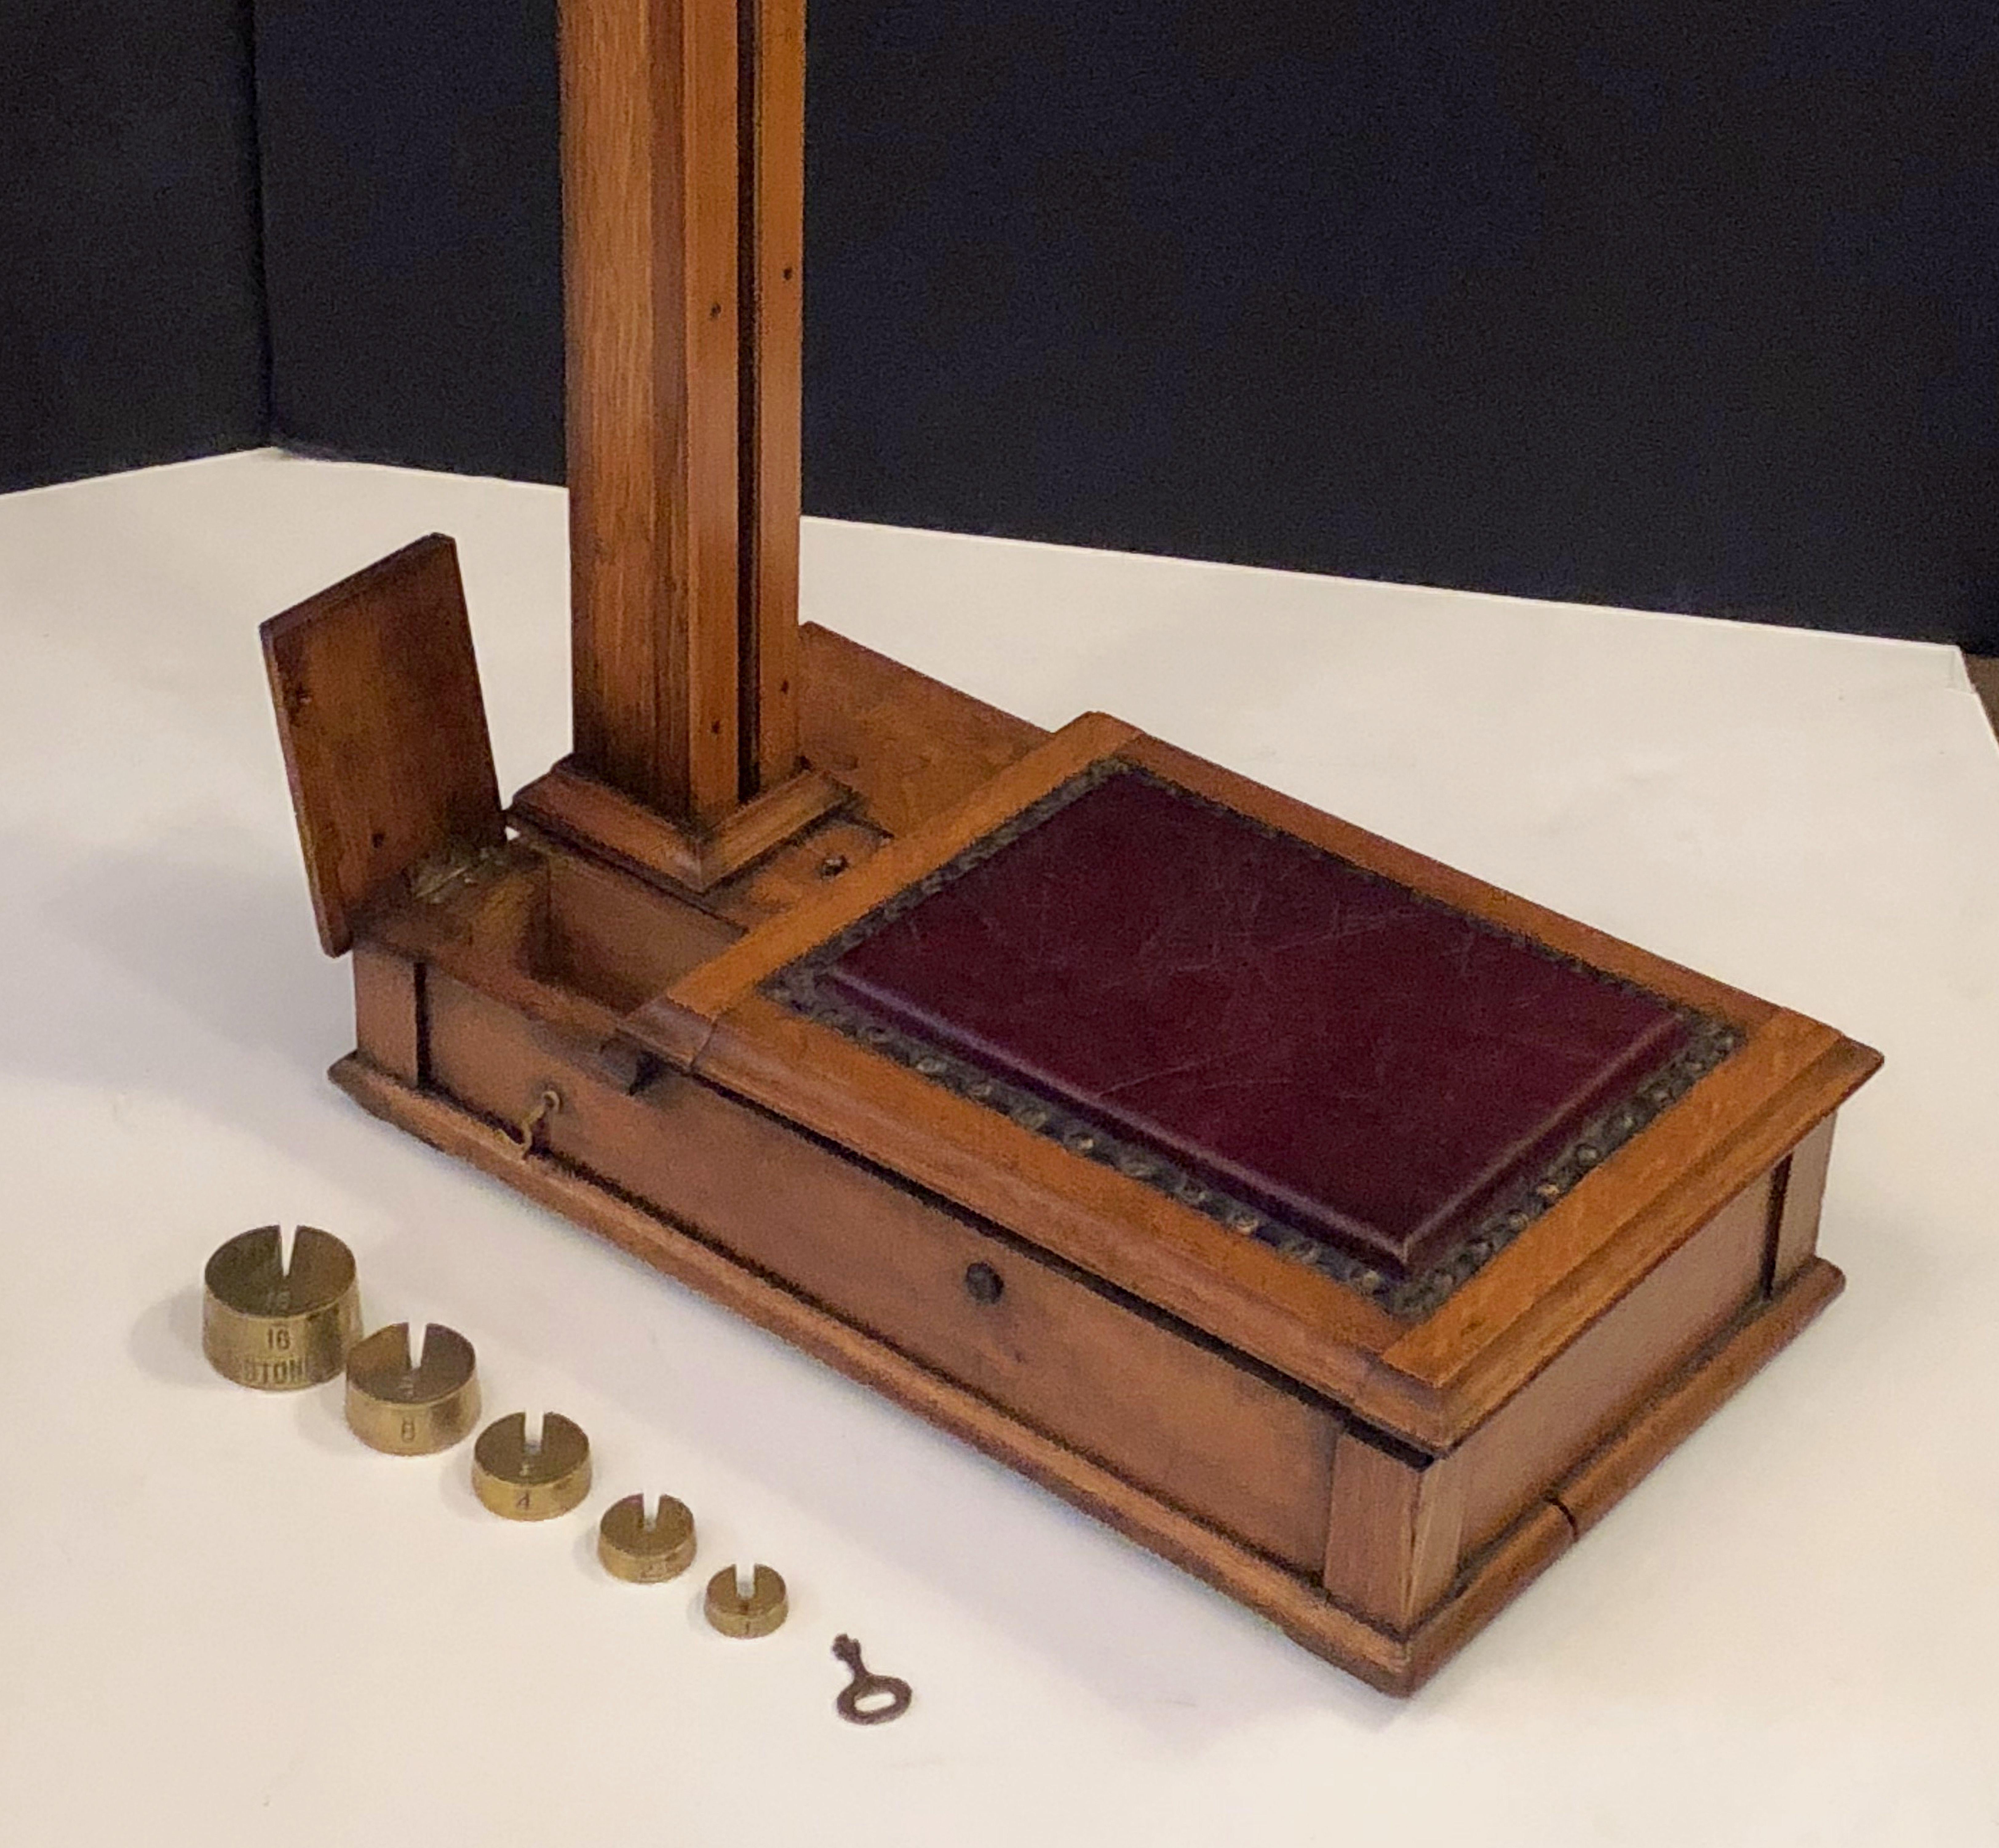 Edwardian British Athlete's Personal Floor Standing Scale of Oak, Boxwood, and Brass